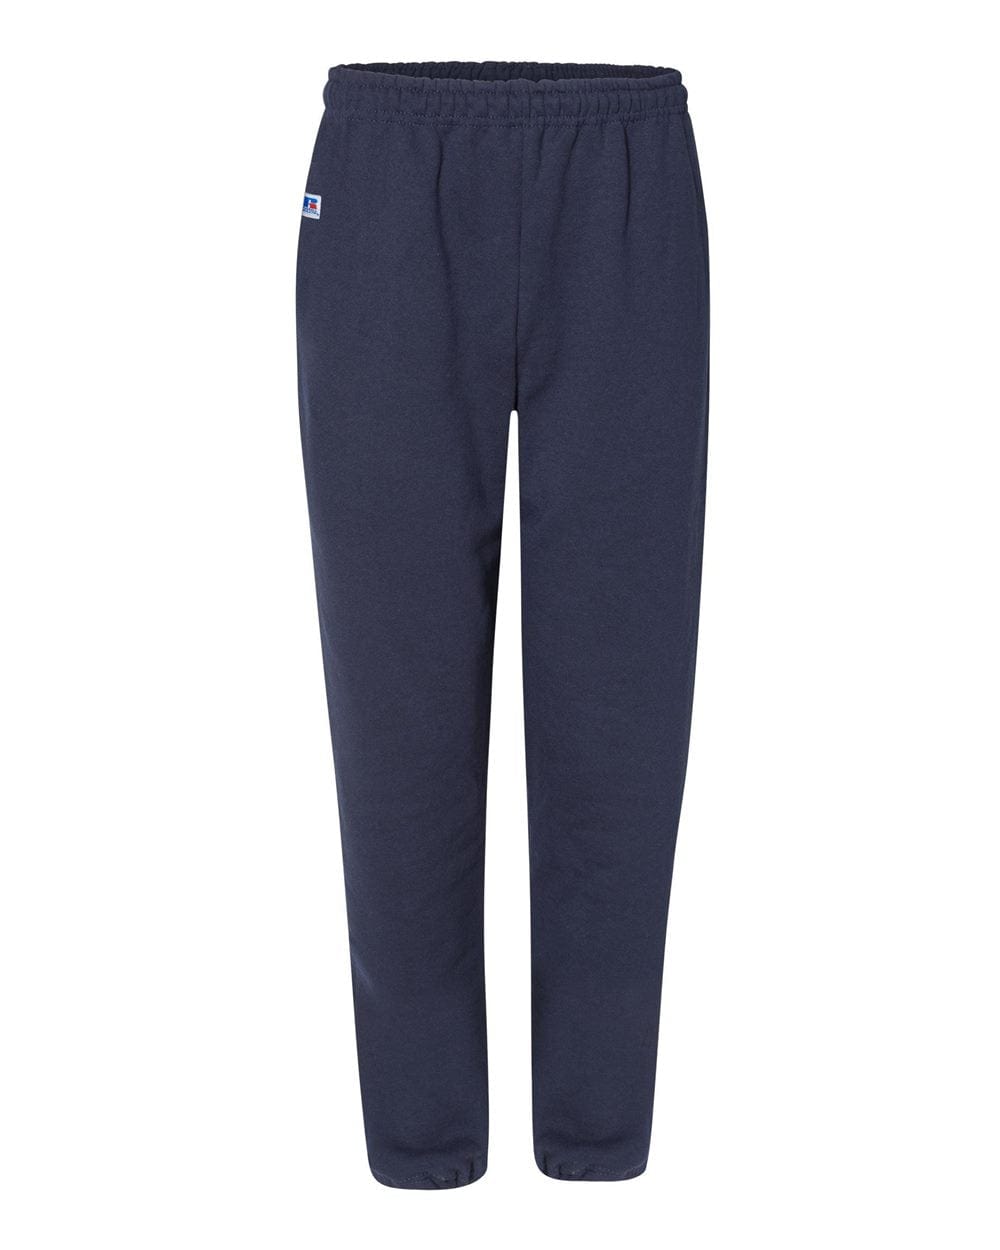 Russell Athletic - Men's Dri Power® Closed Bottom Sweatpants with